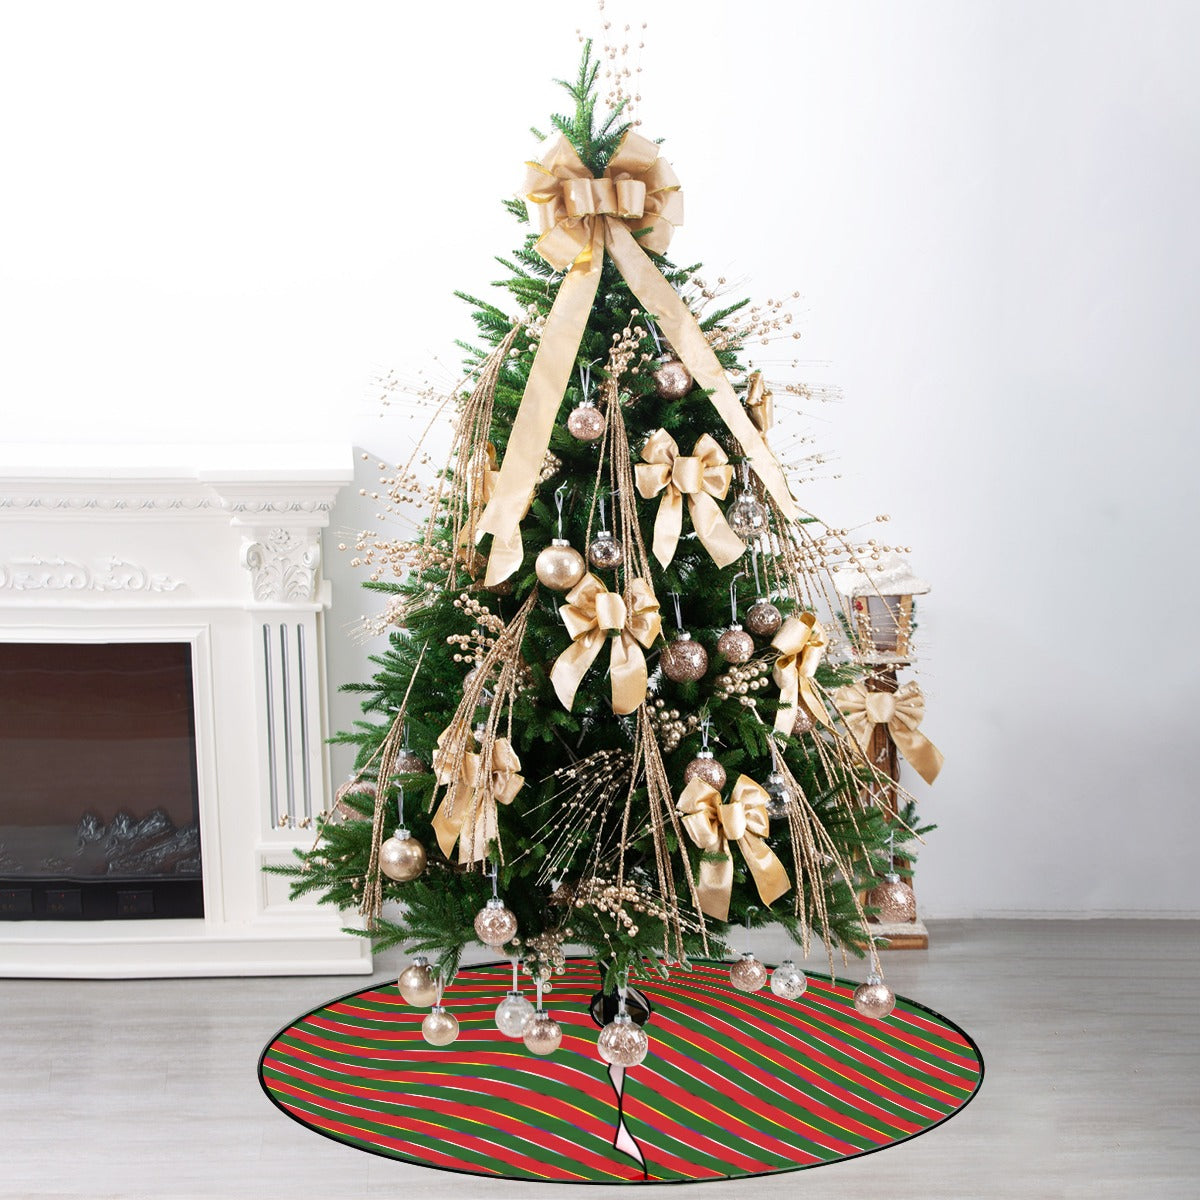 Photo of a small Christmas tree with gold decorations. It has a tree skirt with wide red and green stripes, and narrow rainbow stripes.